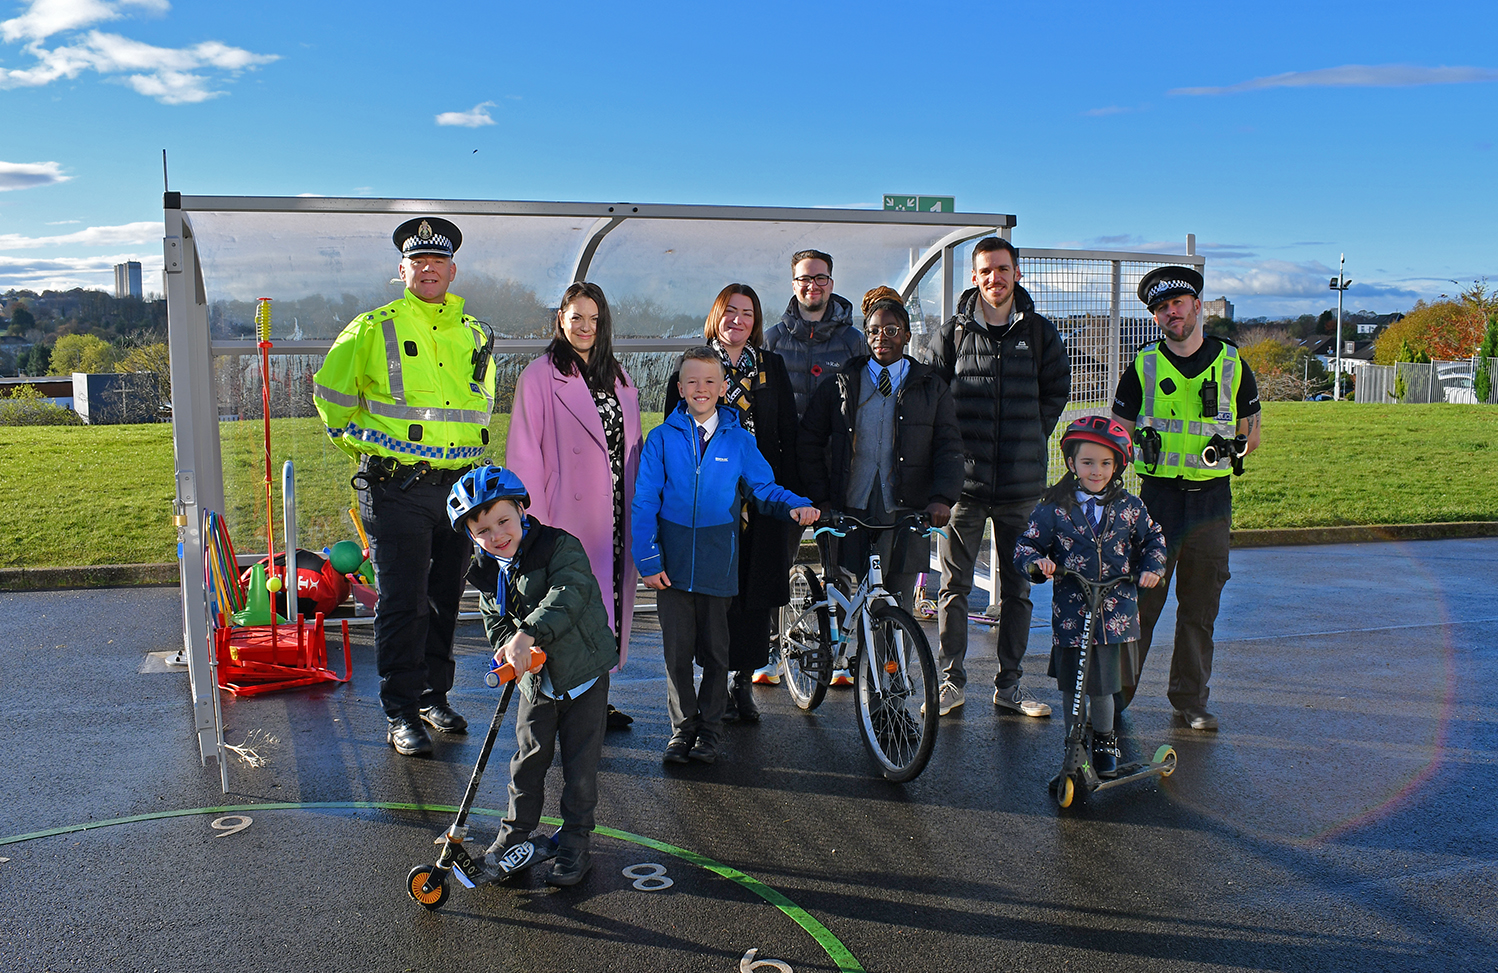 Councilllor Paul Ferretti, Convener of the PNCA committee is flanked by the Headteachers of St Matthew’s Primary School and Wester Cleddens Primary School. Also in pictured are two members of the Community Police team and two pupils from each school posing with scooters and bicycles.